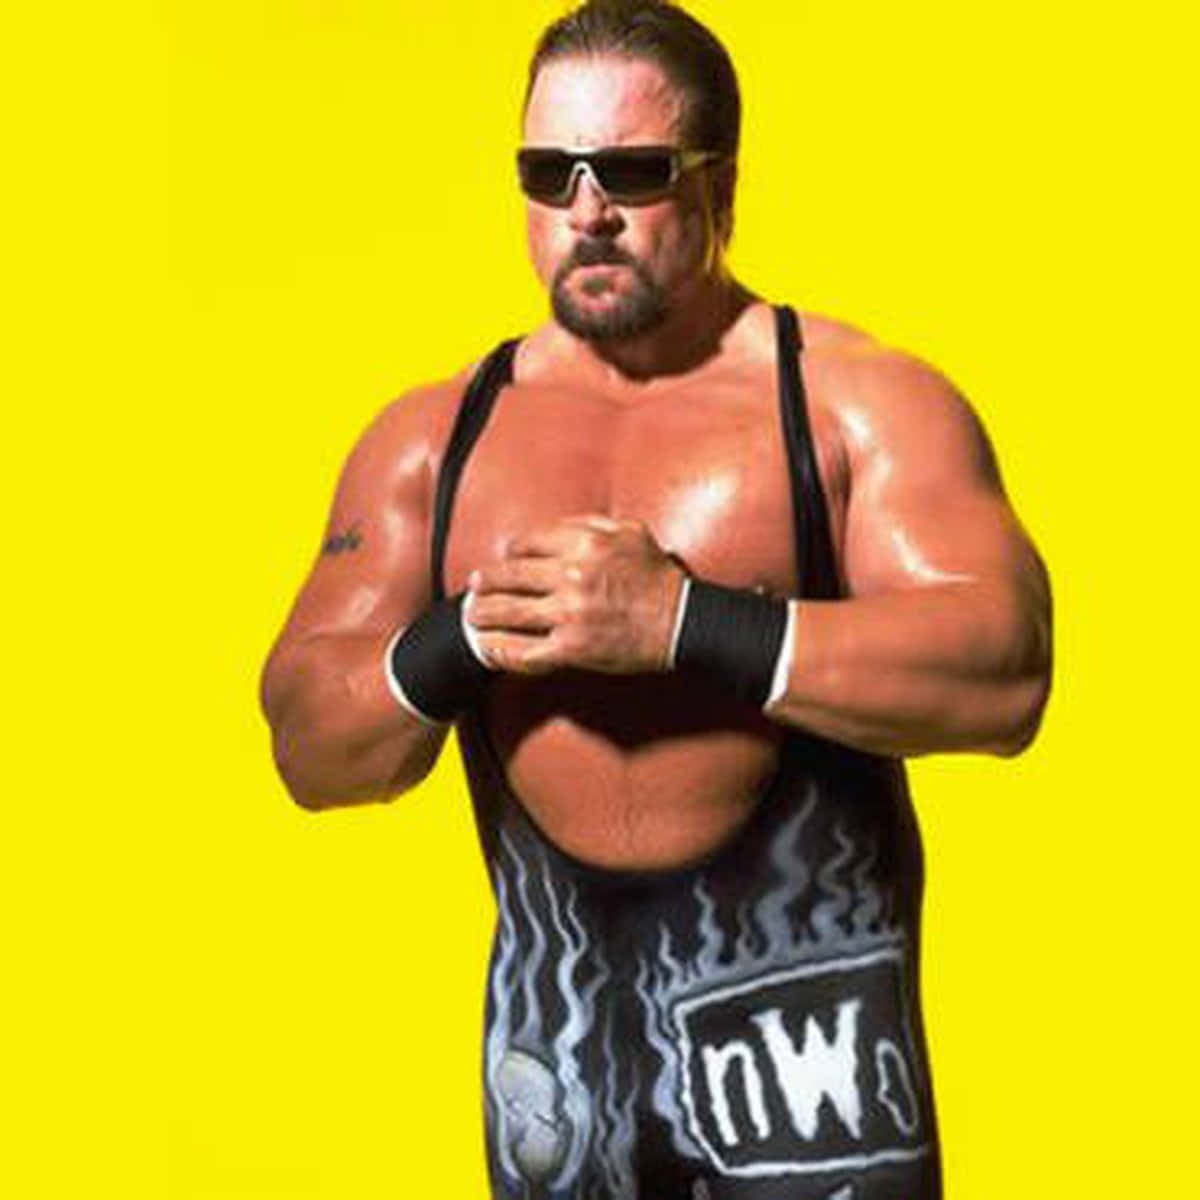 Scott Norton striking a pose in his iconic black singlet against a vibrant yellow background Wallpaper